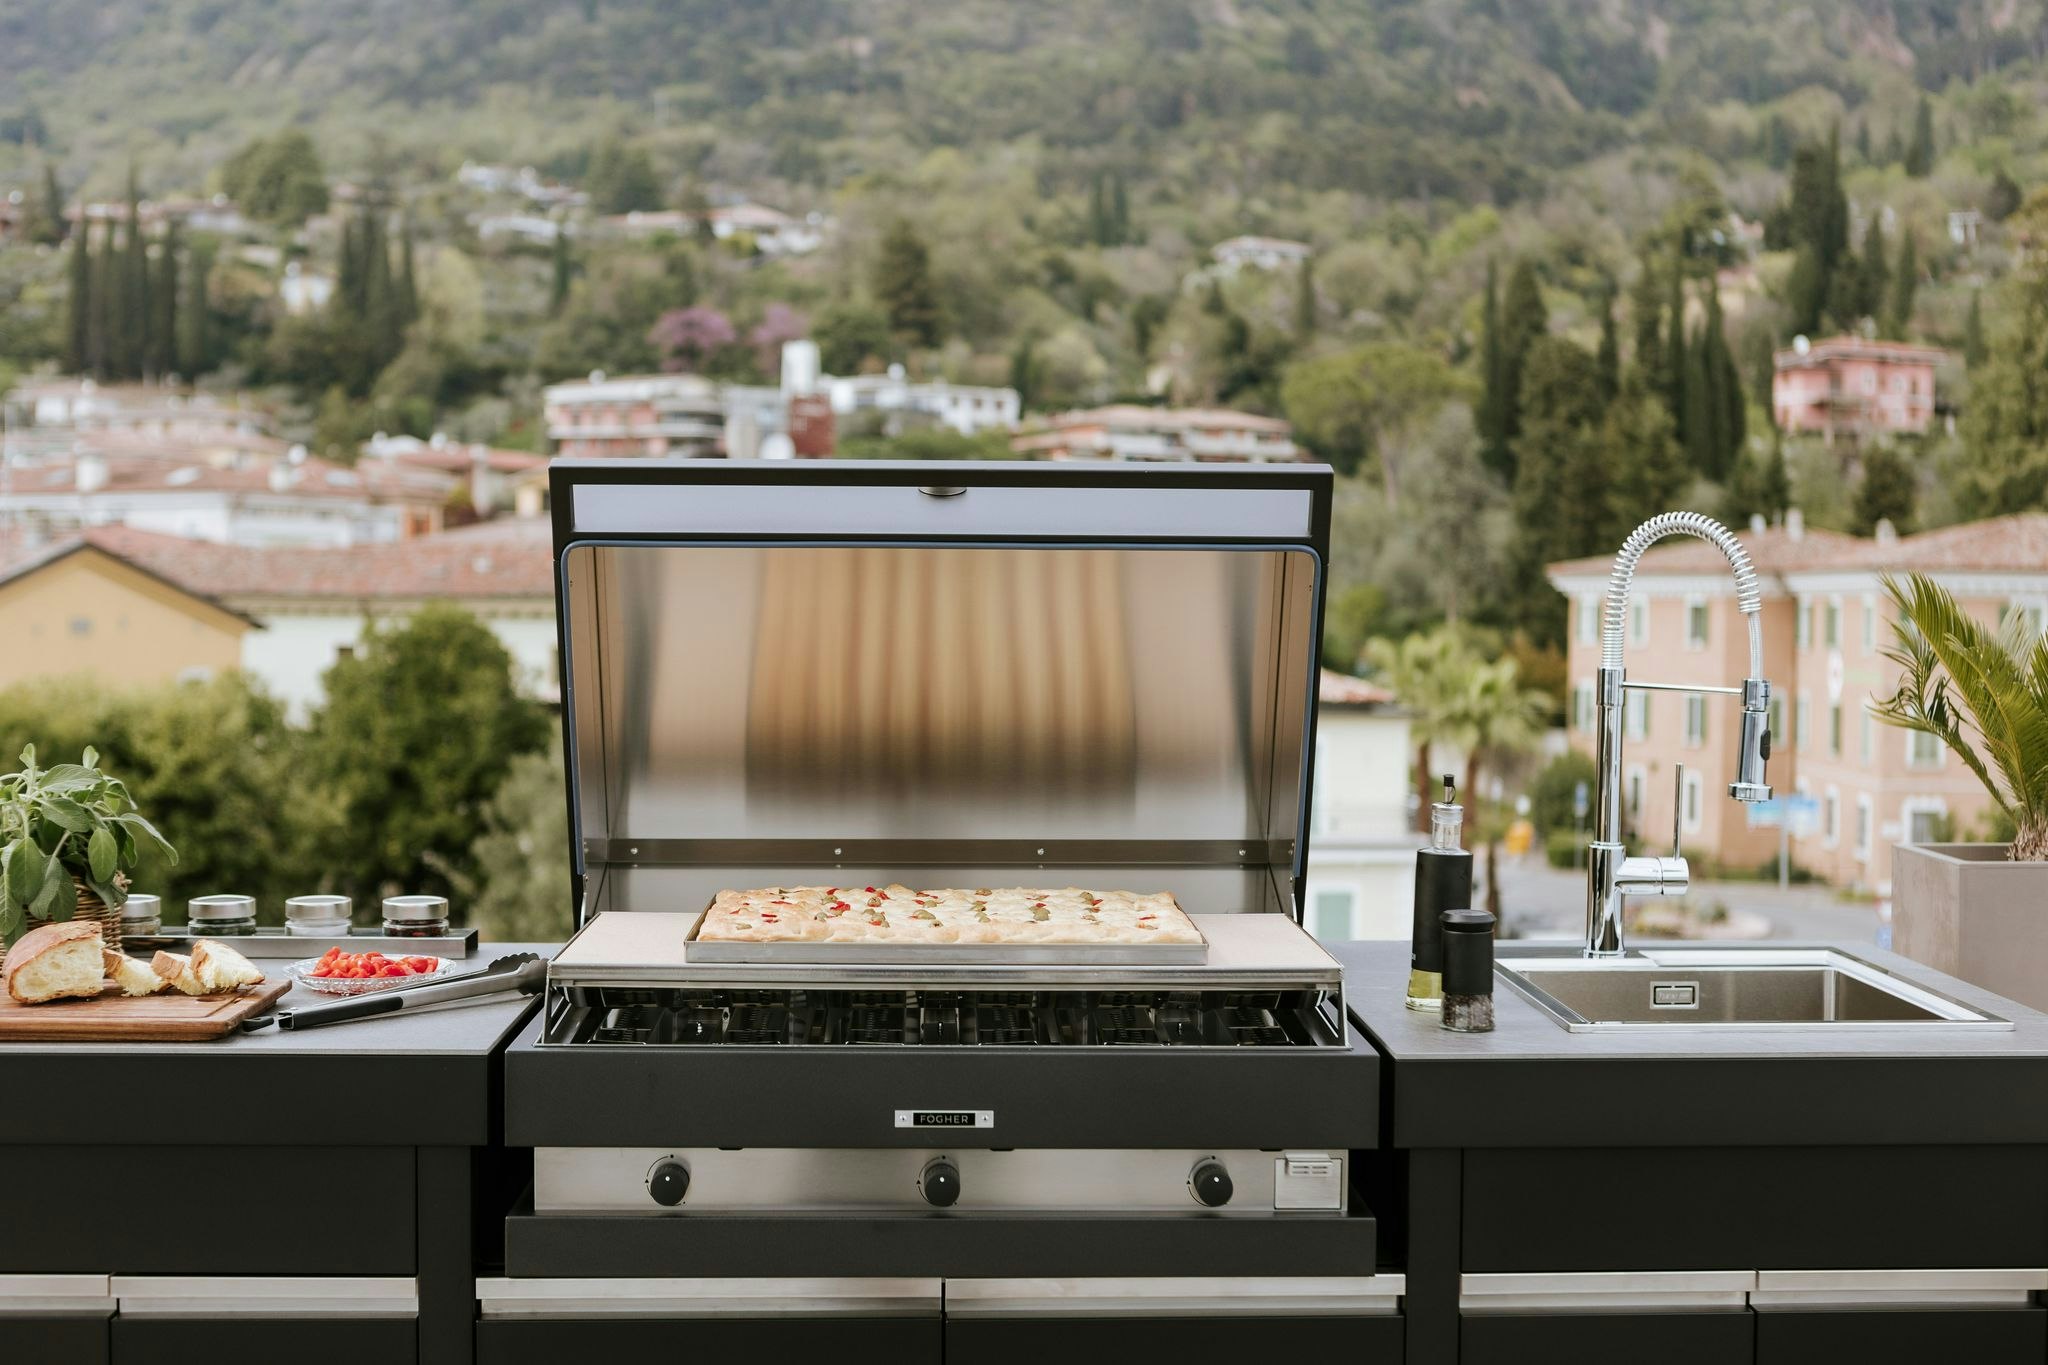 An outdoor kitchen featuring a pizza stone grill, where a delicious pizza cooks to perfection. The grill is adorned with the pizza stone, topped with a sizzling pizza adorned with savory toppings. The scene is set against a backdrop of nature, with the warm glow of the grill and the anticipation of a delectable meal creating an inviting atmosphere.